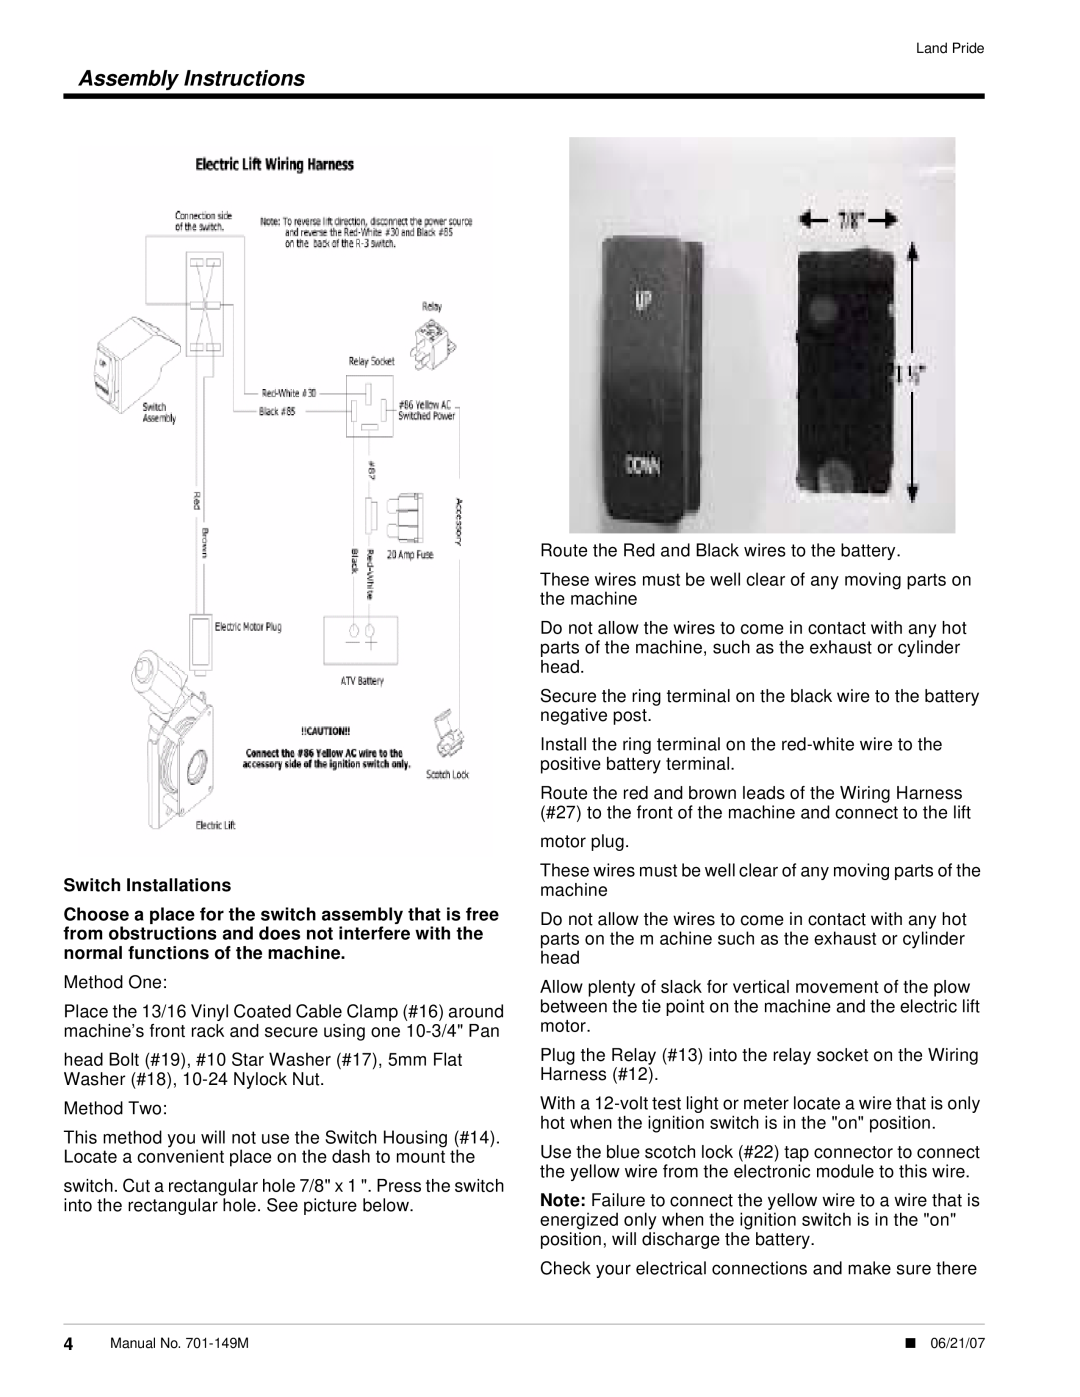 Land Pride ST Series, NT Series, 701-069A installation instructions Switch Installations, Assembly Instructions 